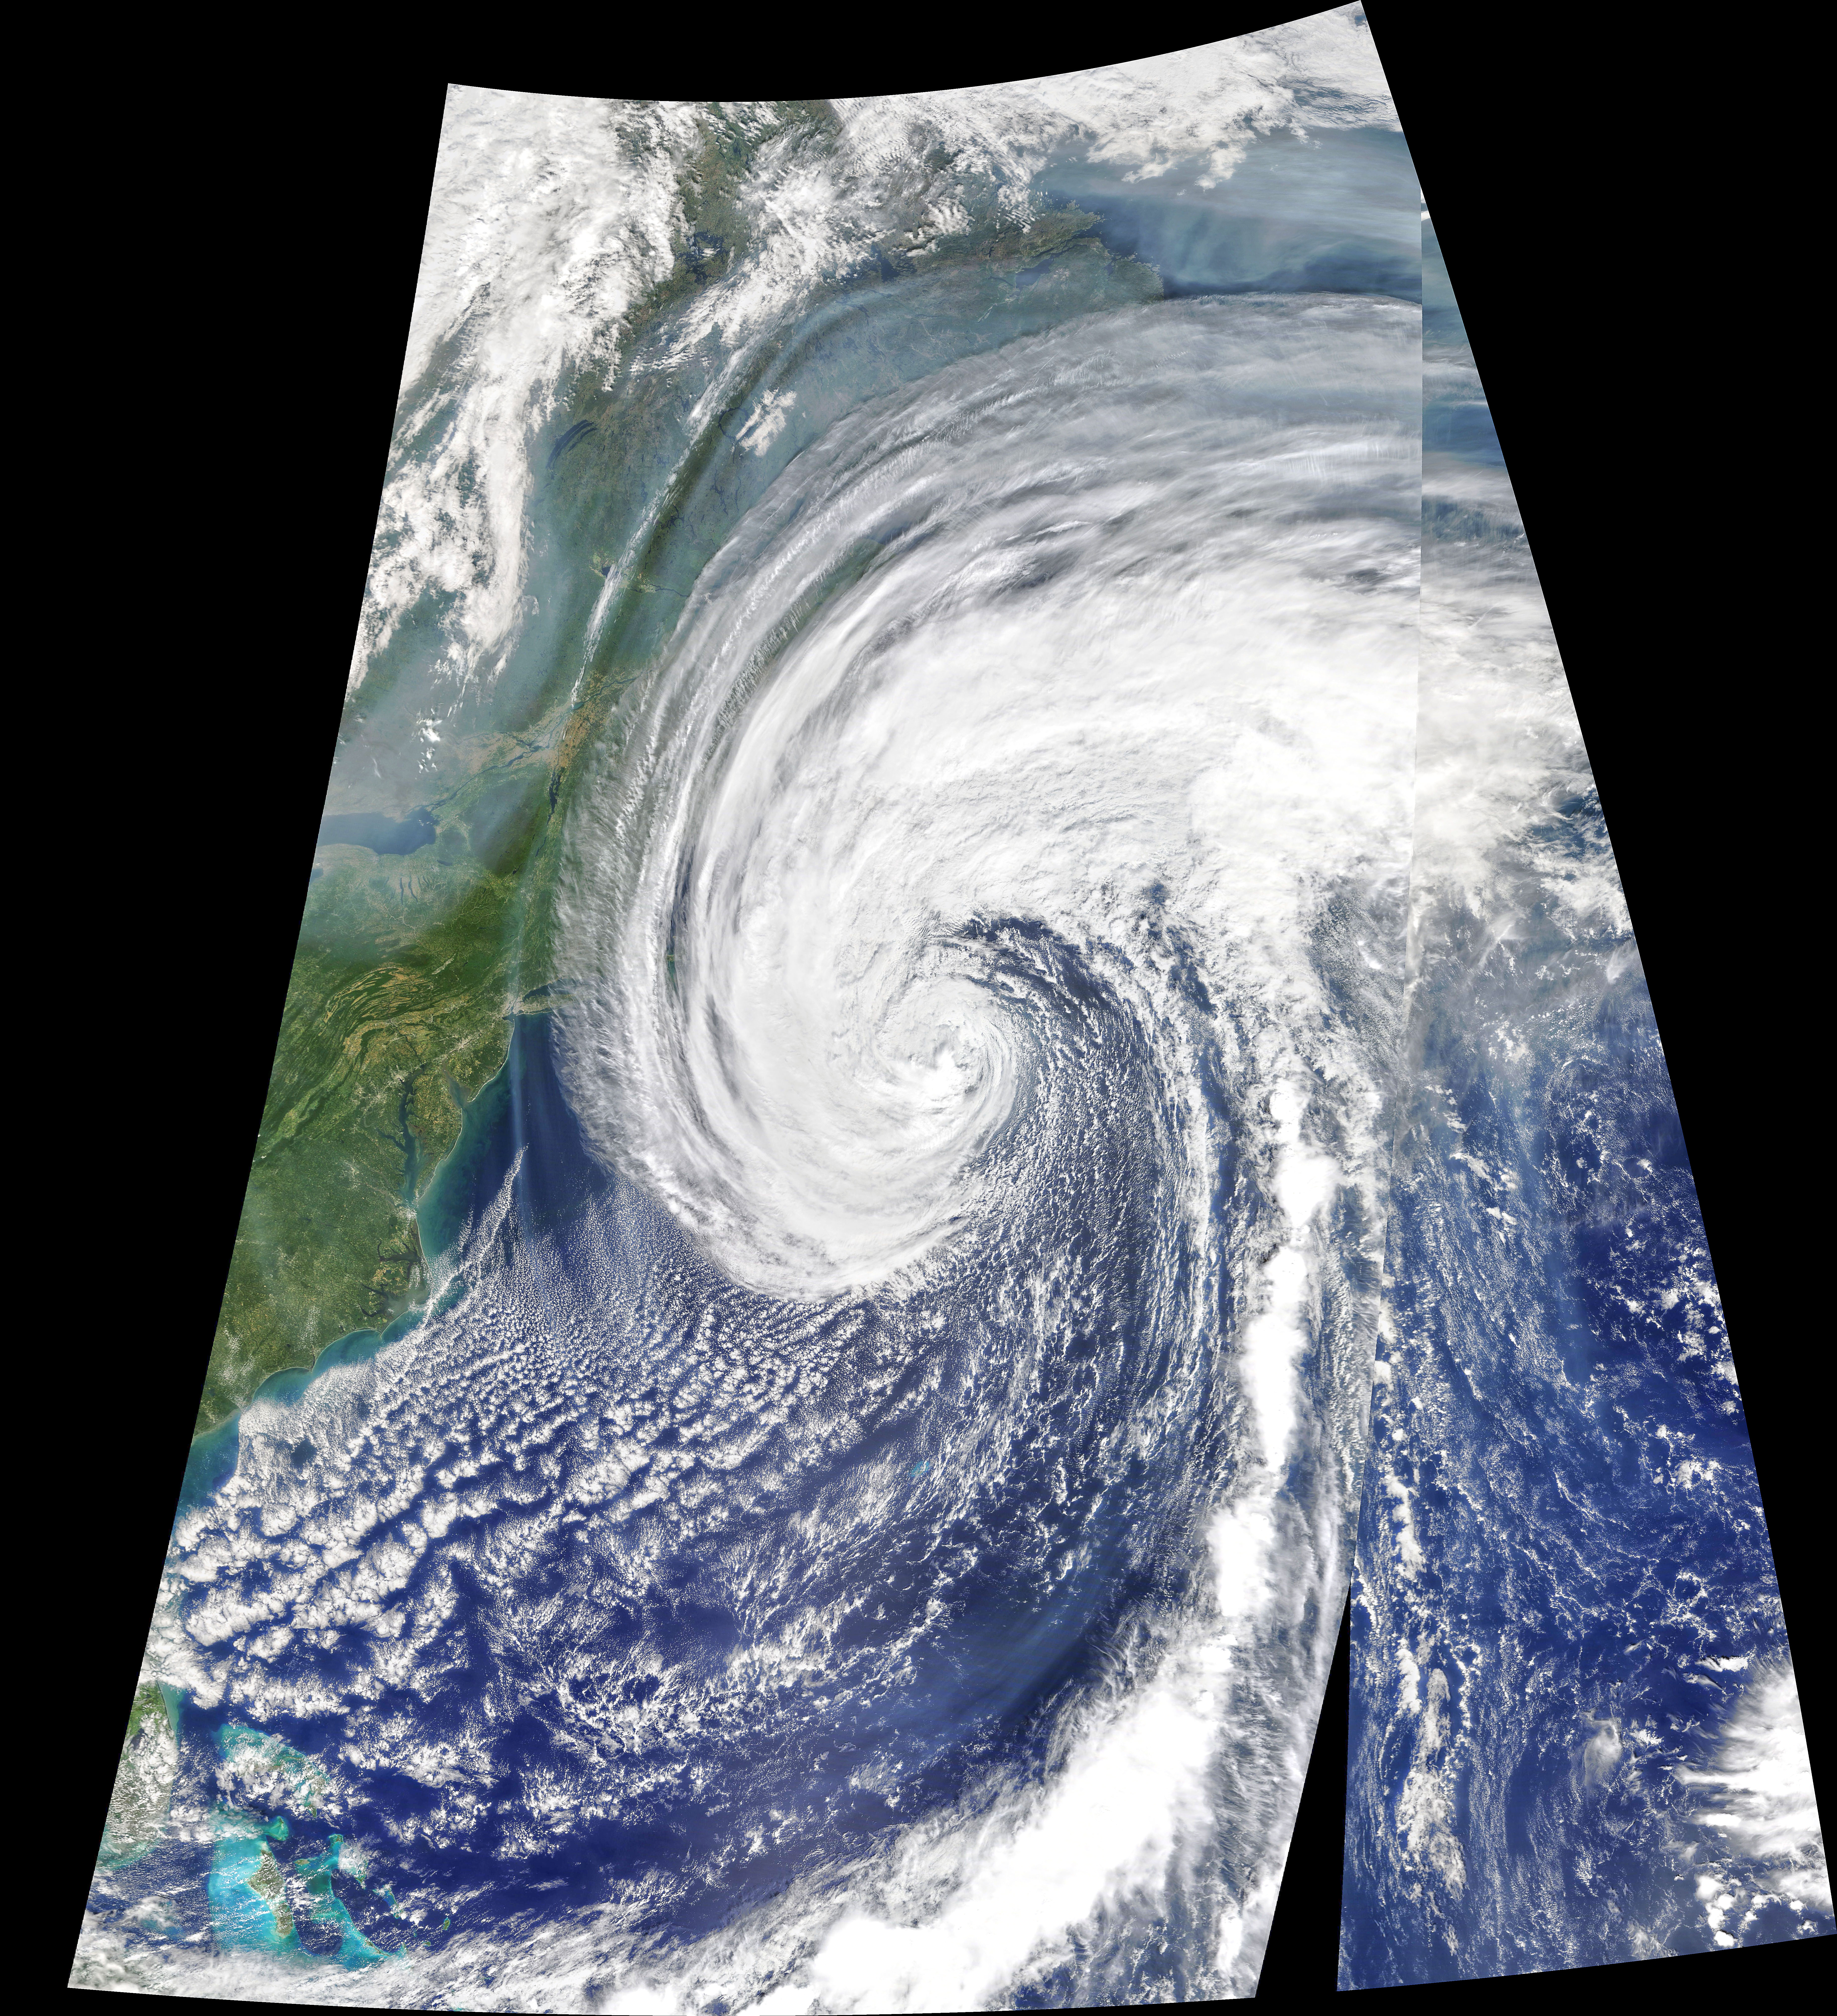 Hurricane Teddy Approaches Nova Scotia - related image preview